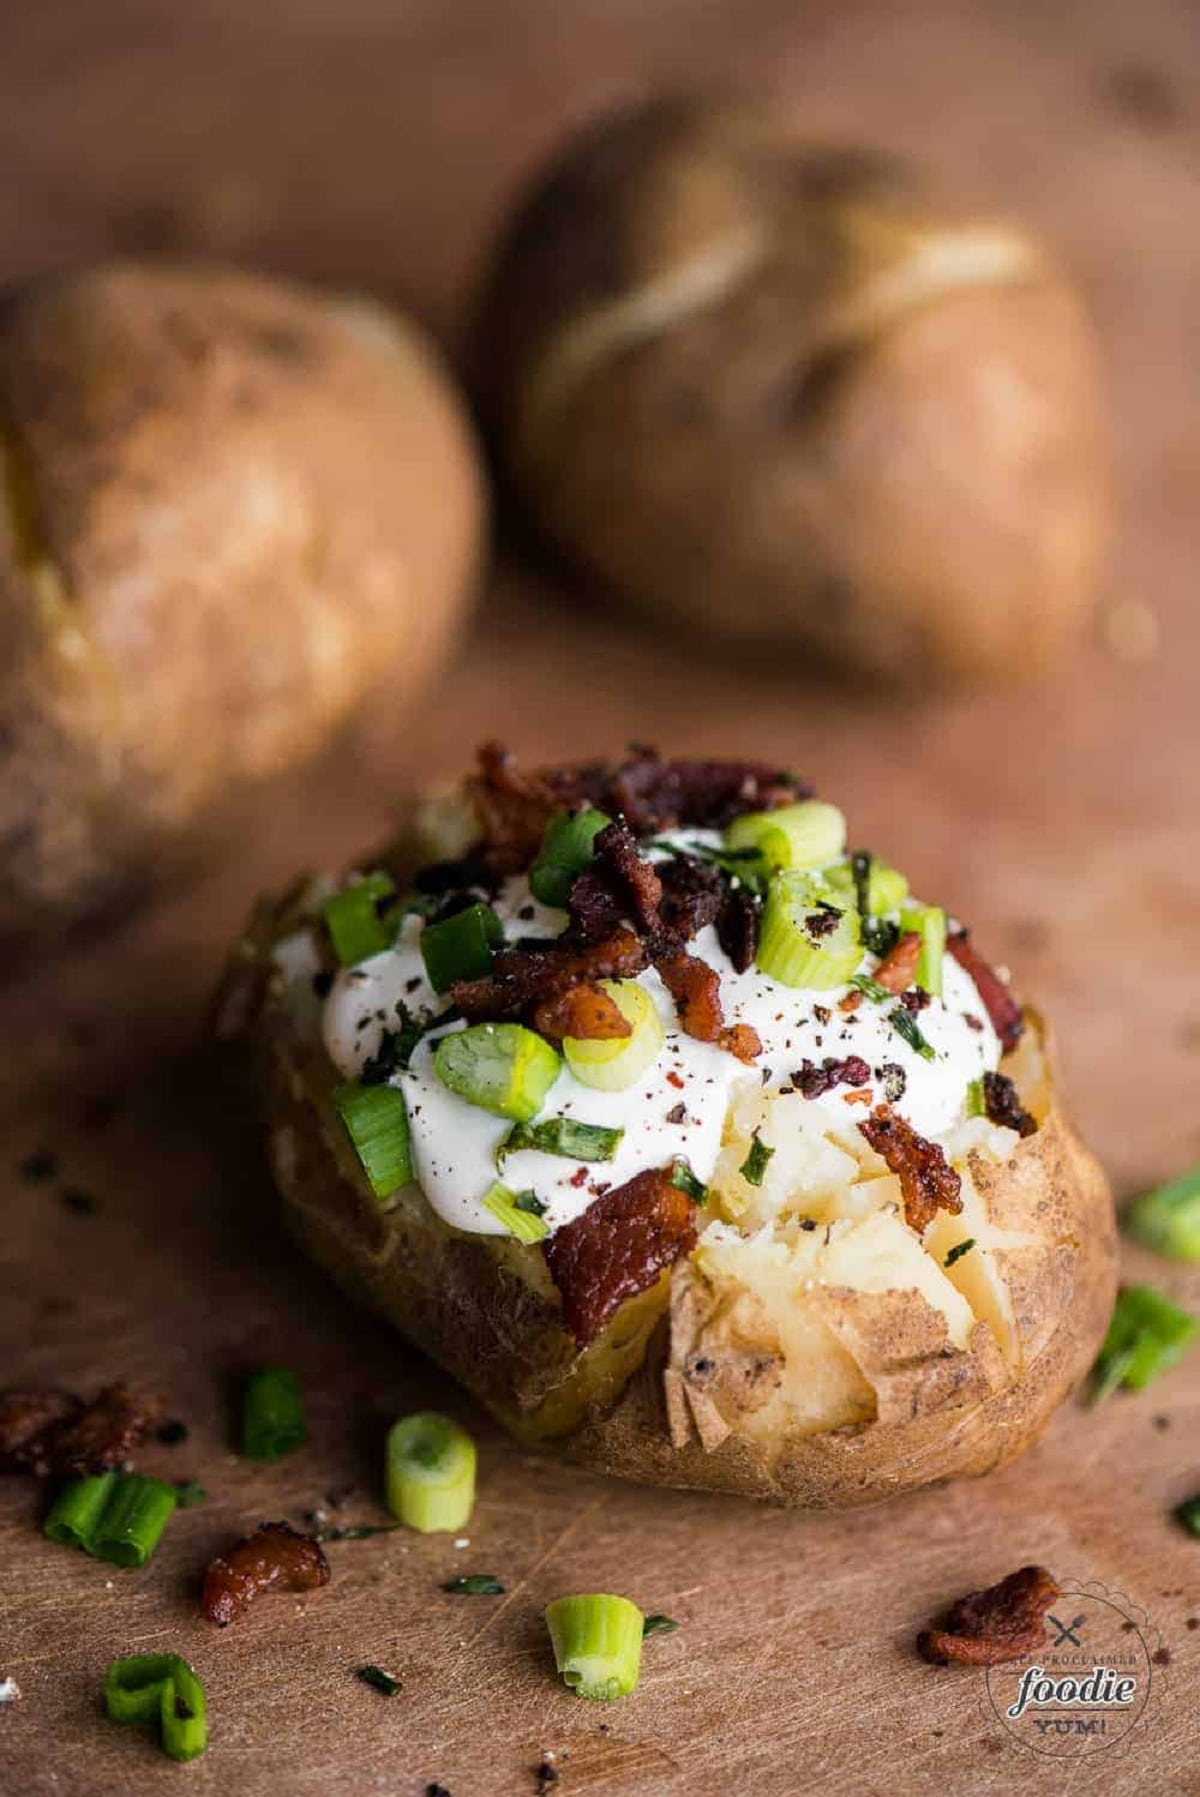 Baked potatoes with sour cream, bacon, green onions and chives